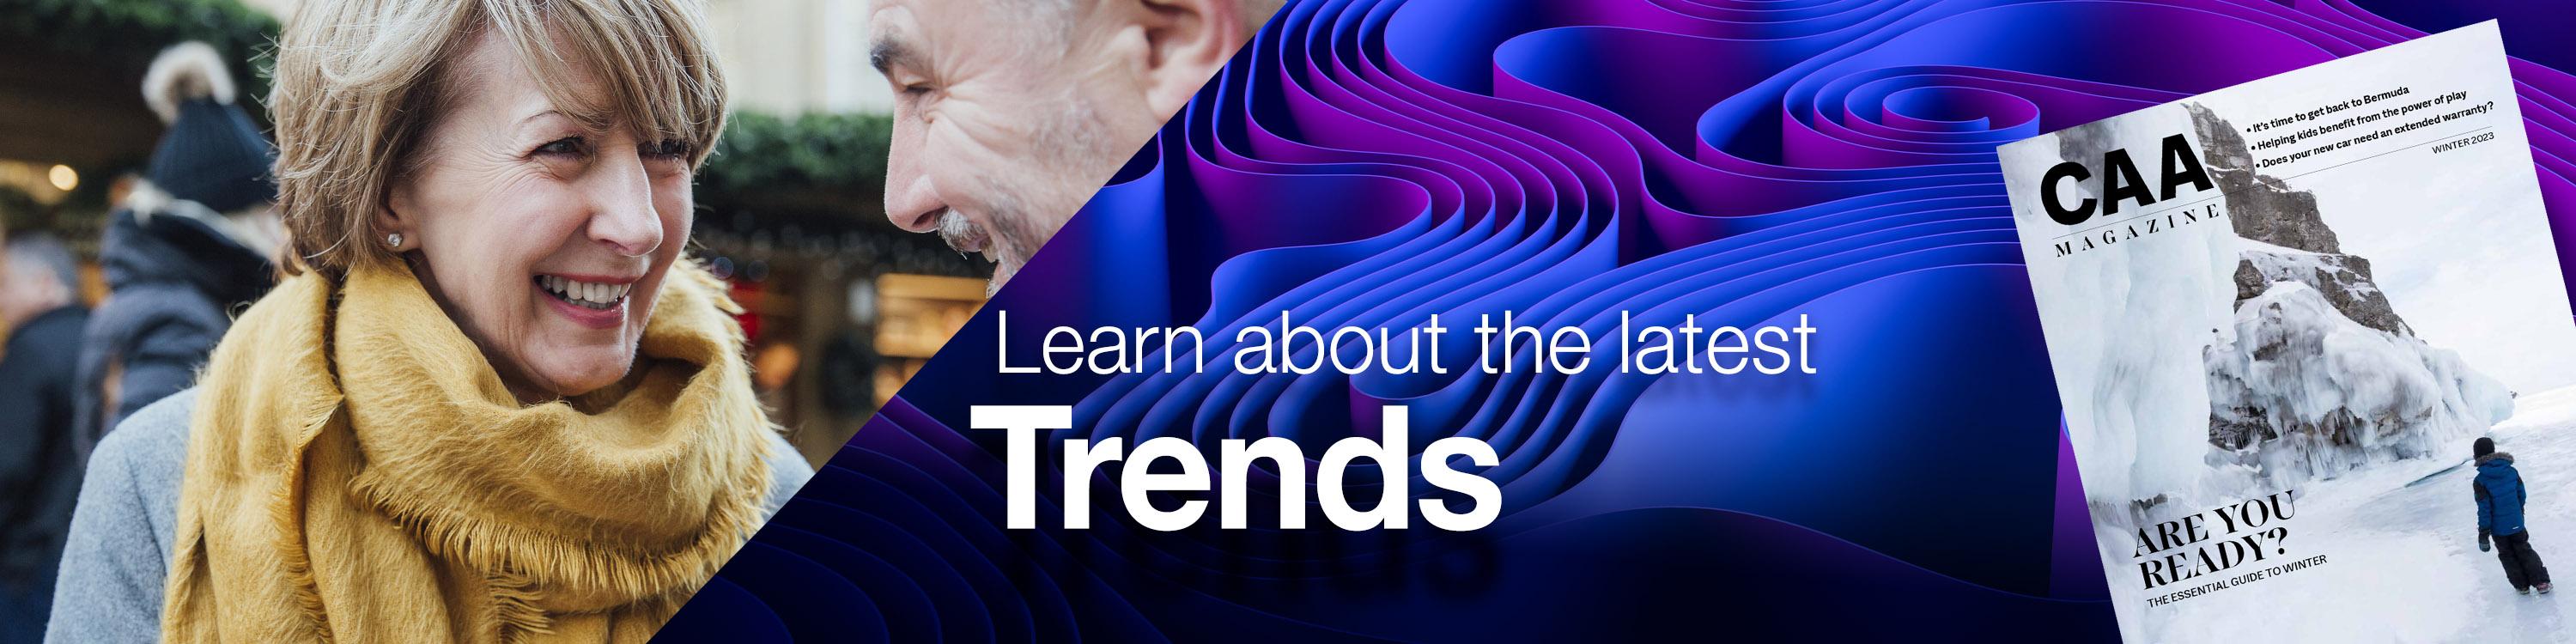 Learn about the latest trends